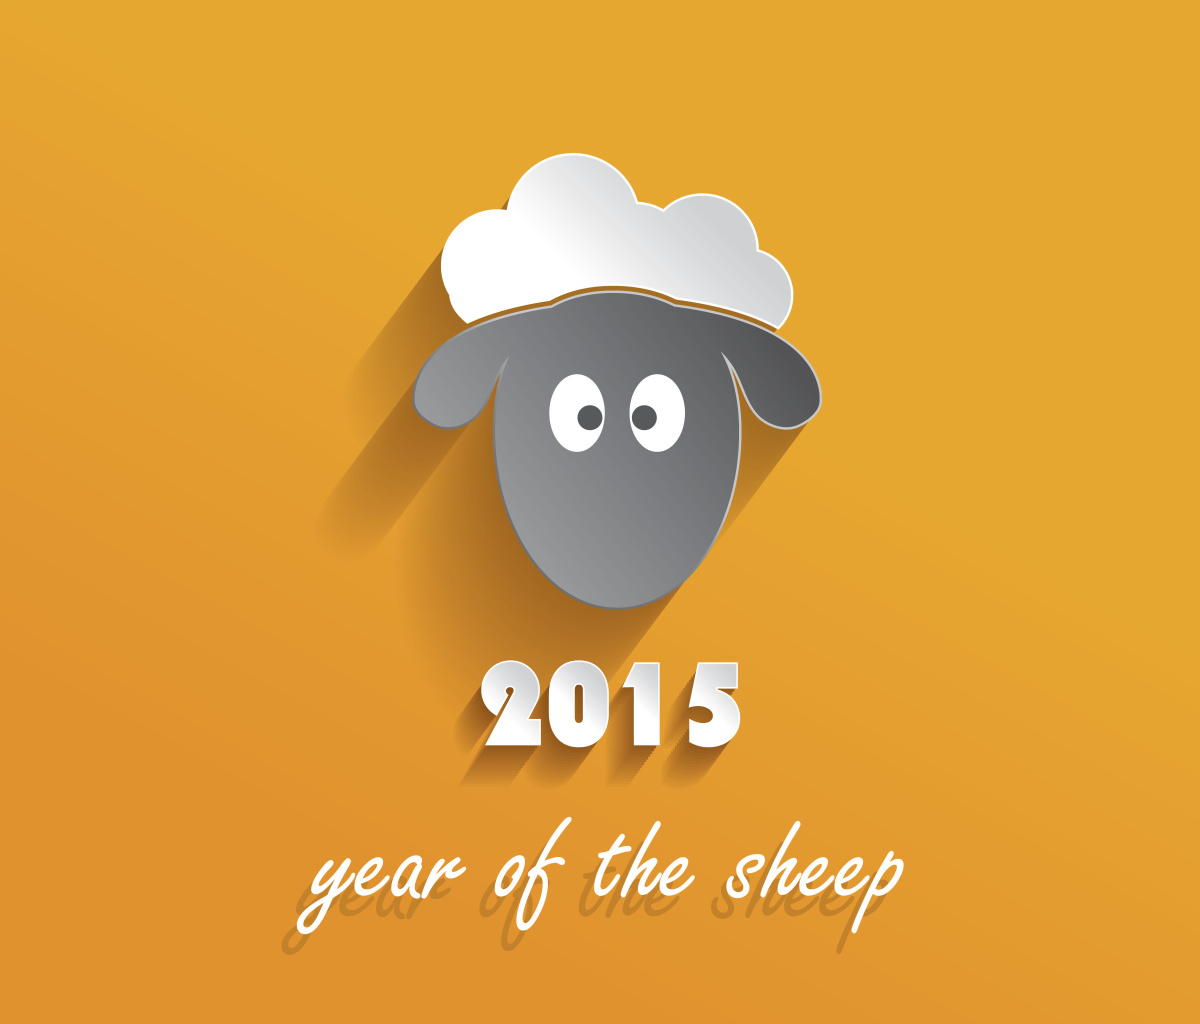 Year of the Sheep 2015 wallpaper 1200x1024